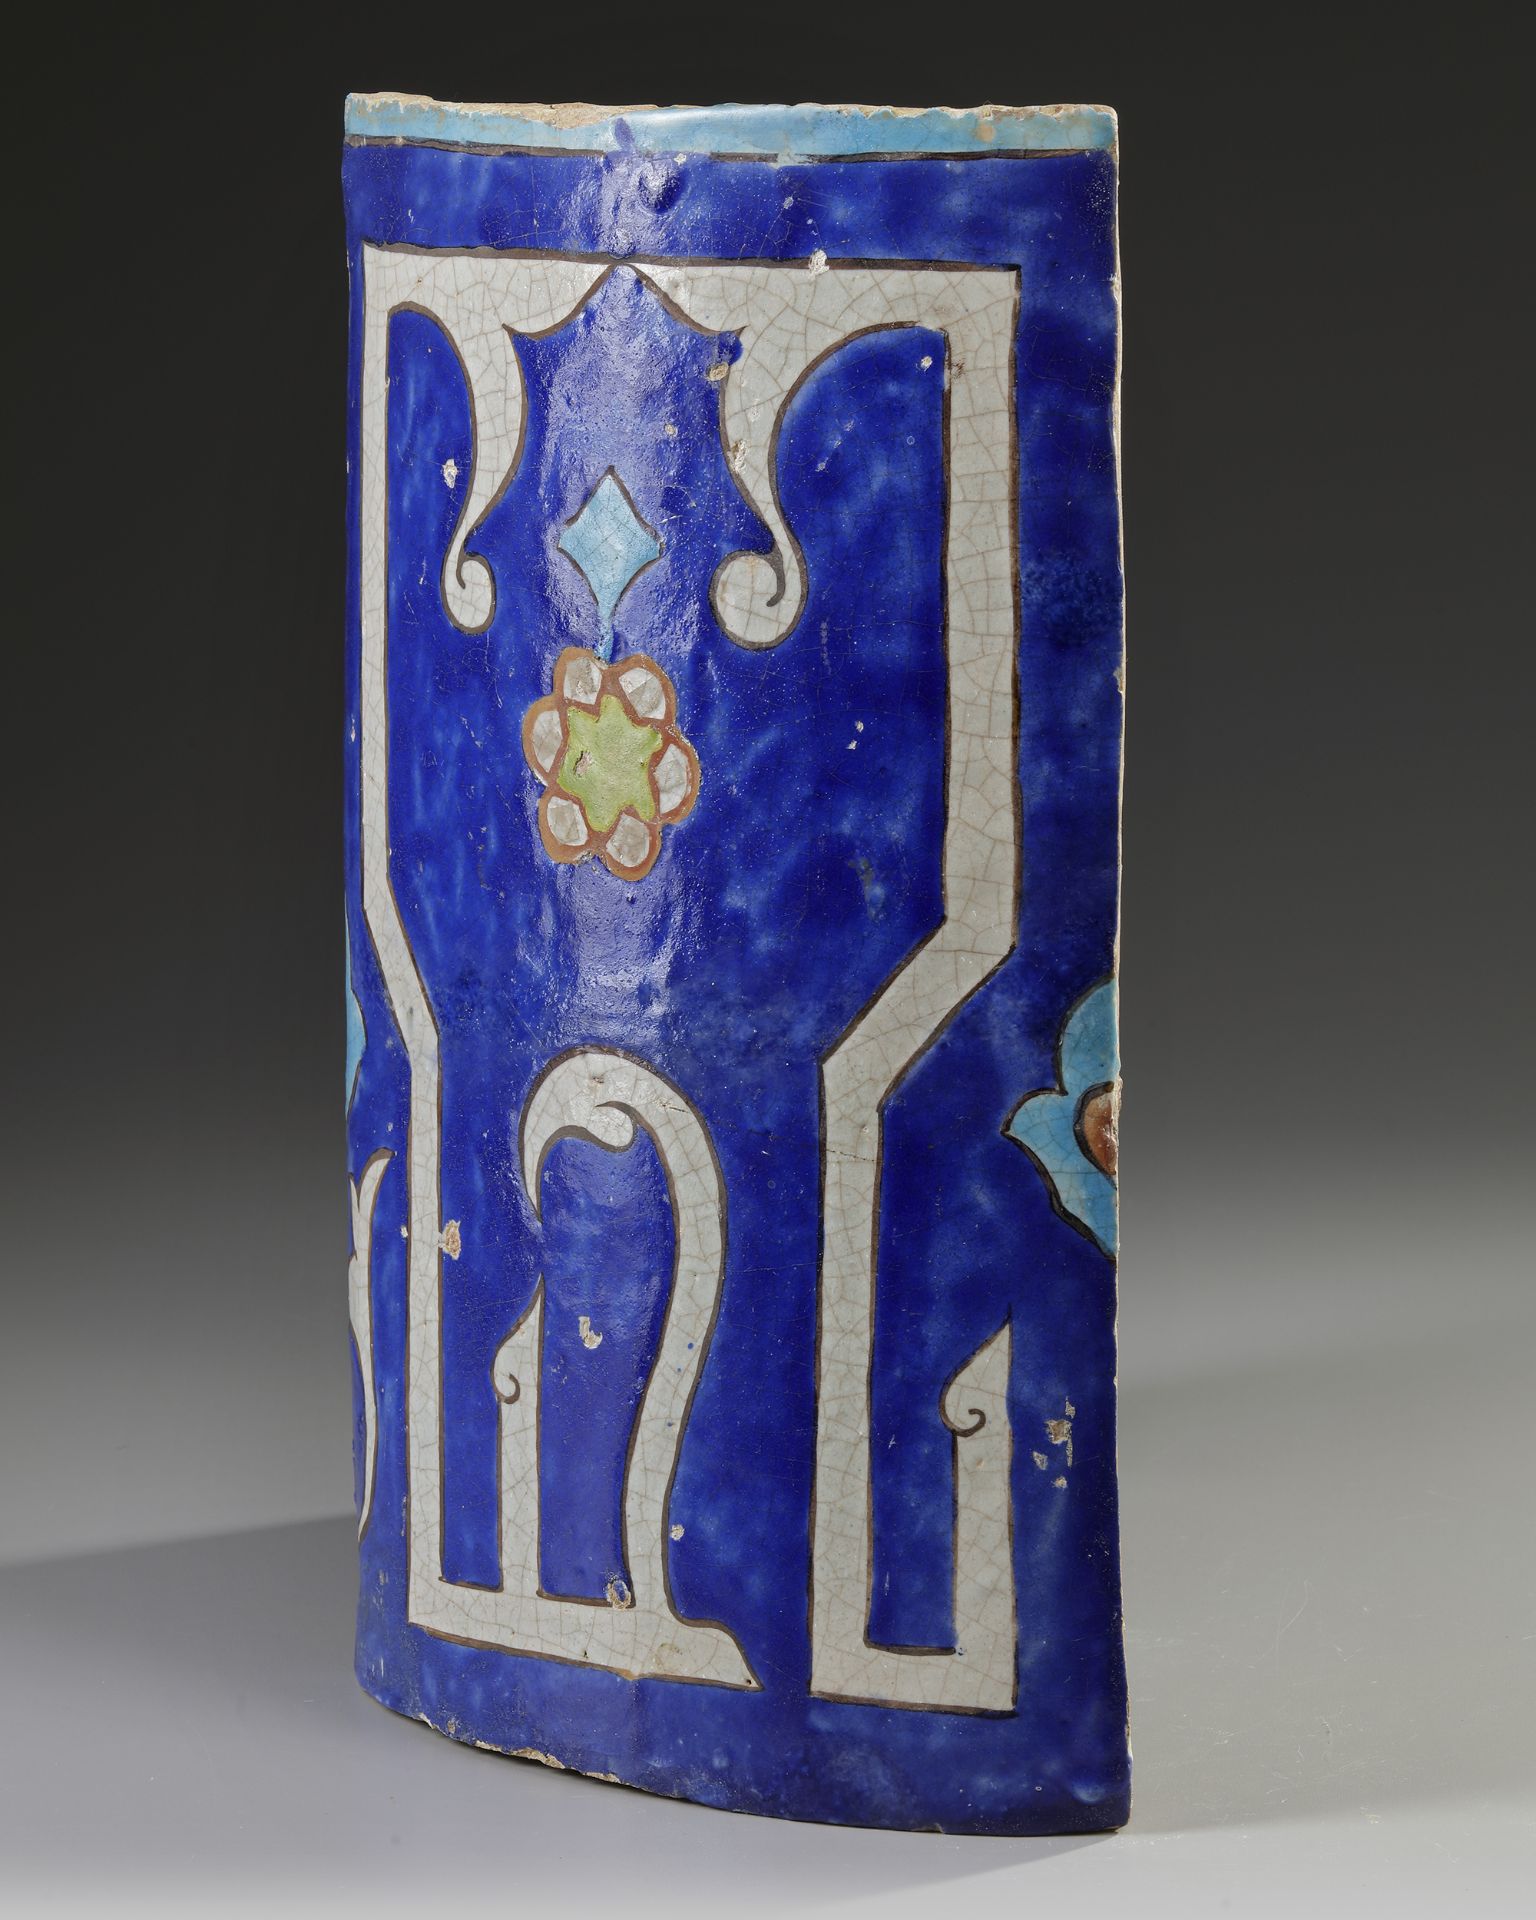 A TIMURID CALLIGRAPHIC POTTERY TILE, CENTRAL ASIA OR EASTERN PERSIA, 14TH-15TH CENTURY - Image 7 of 10